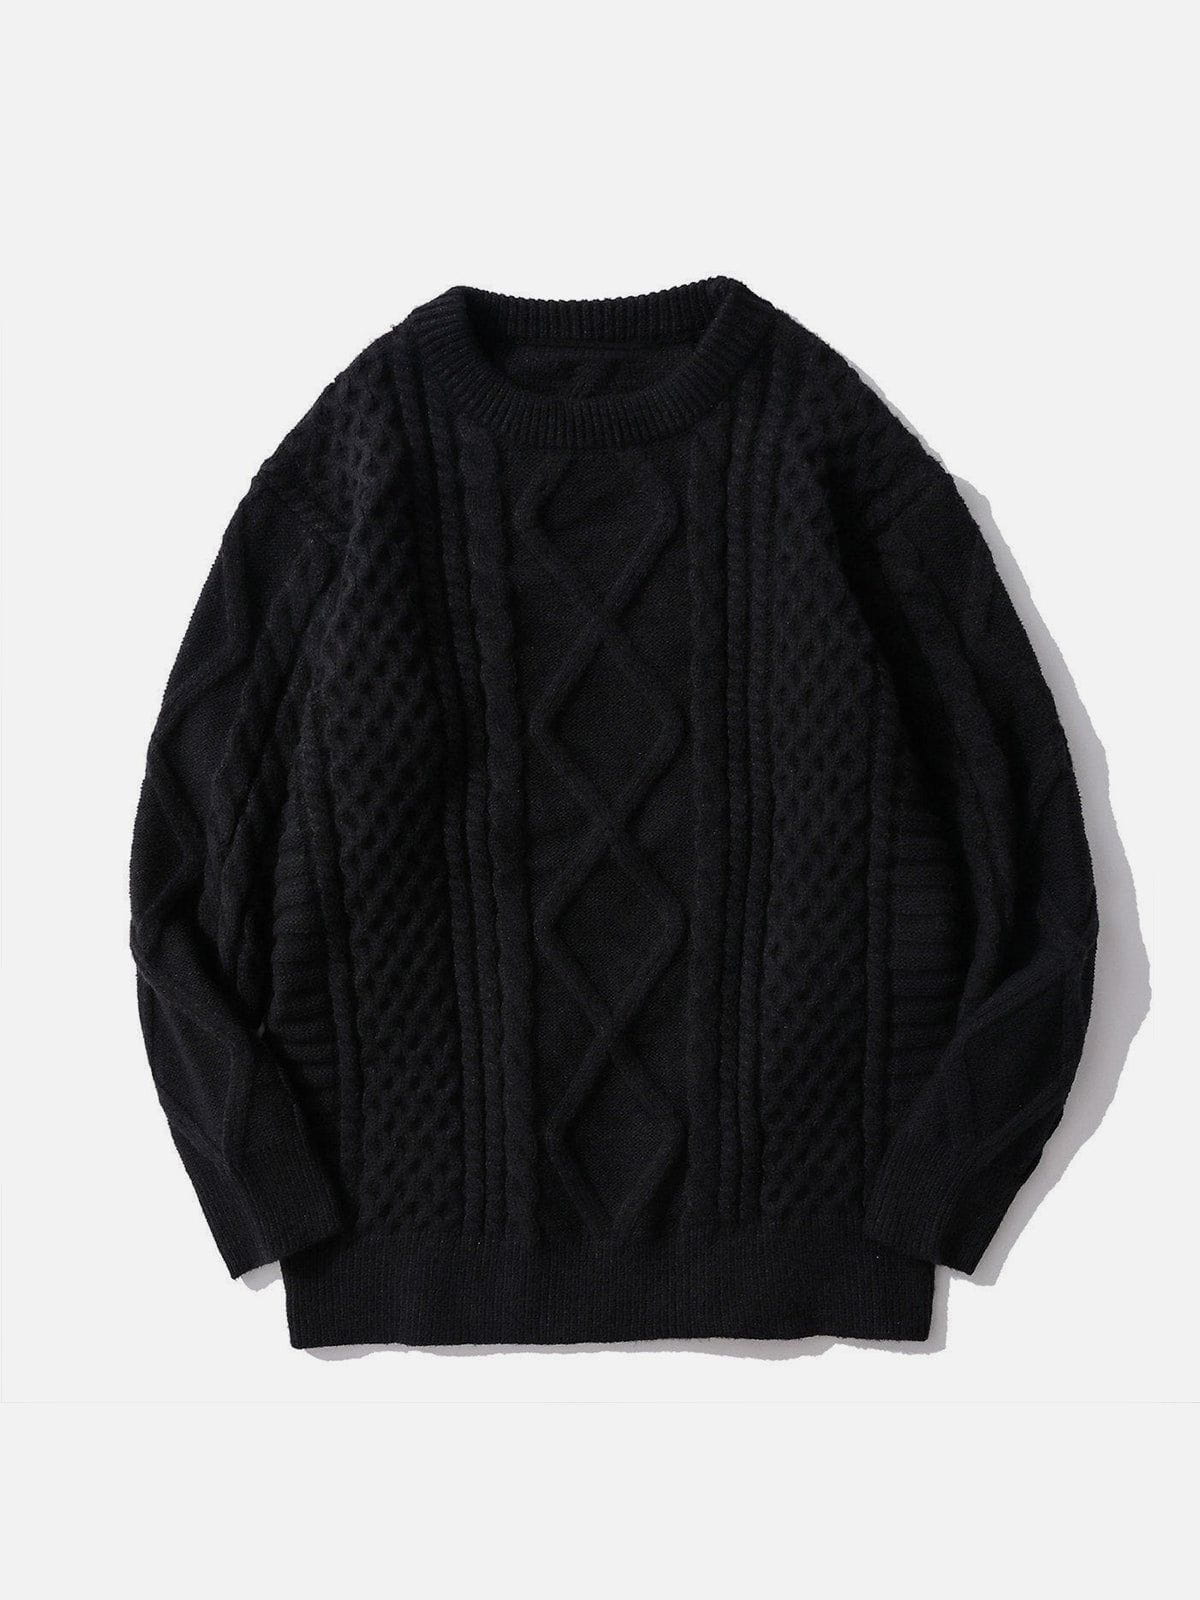 Solid Color Woven Pattern Knit Sweater